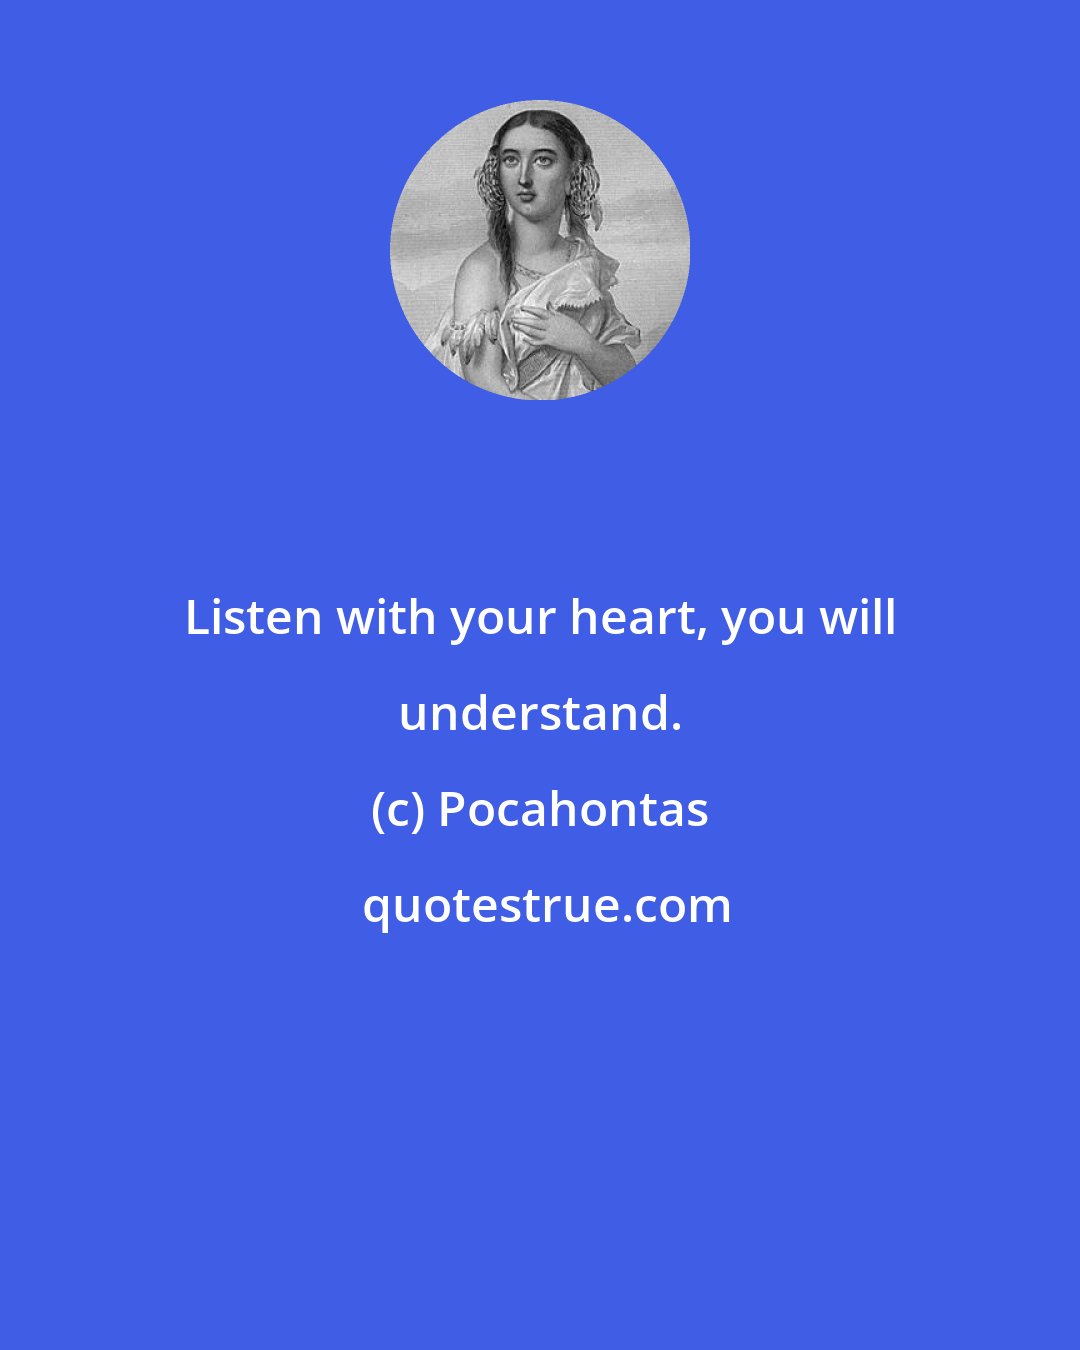 Pocahontas: Listen with your heart, you will understand.